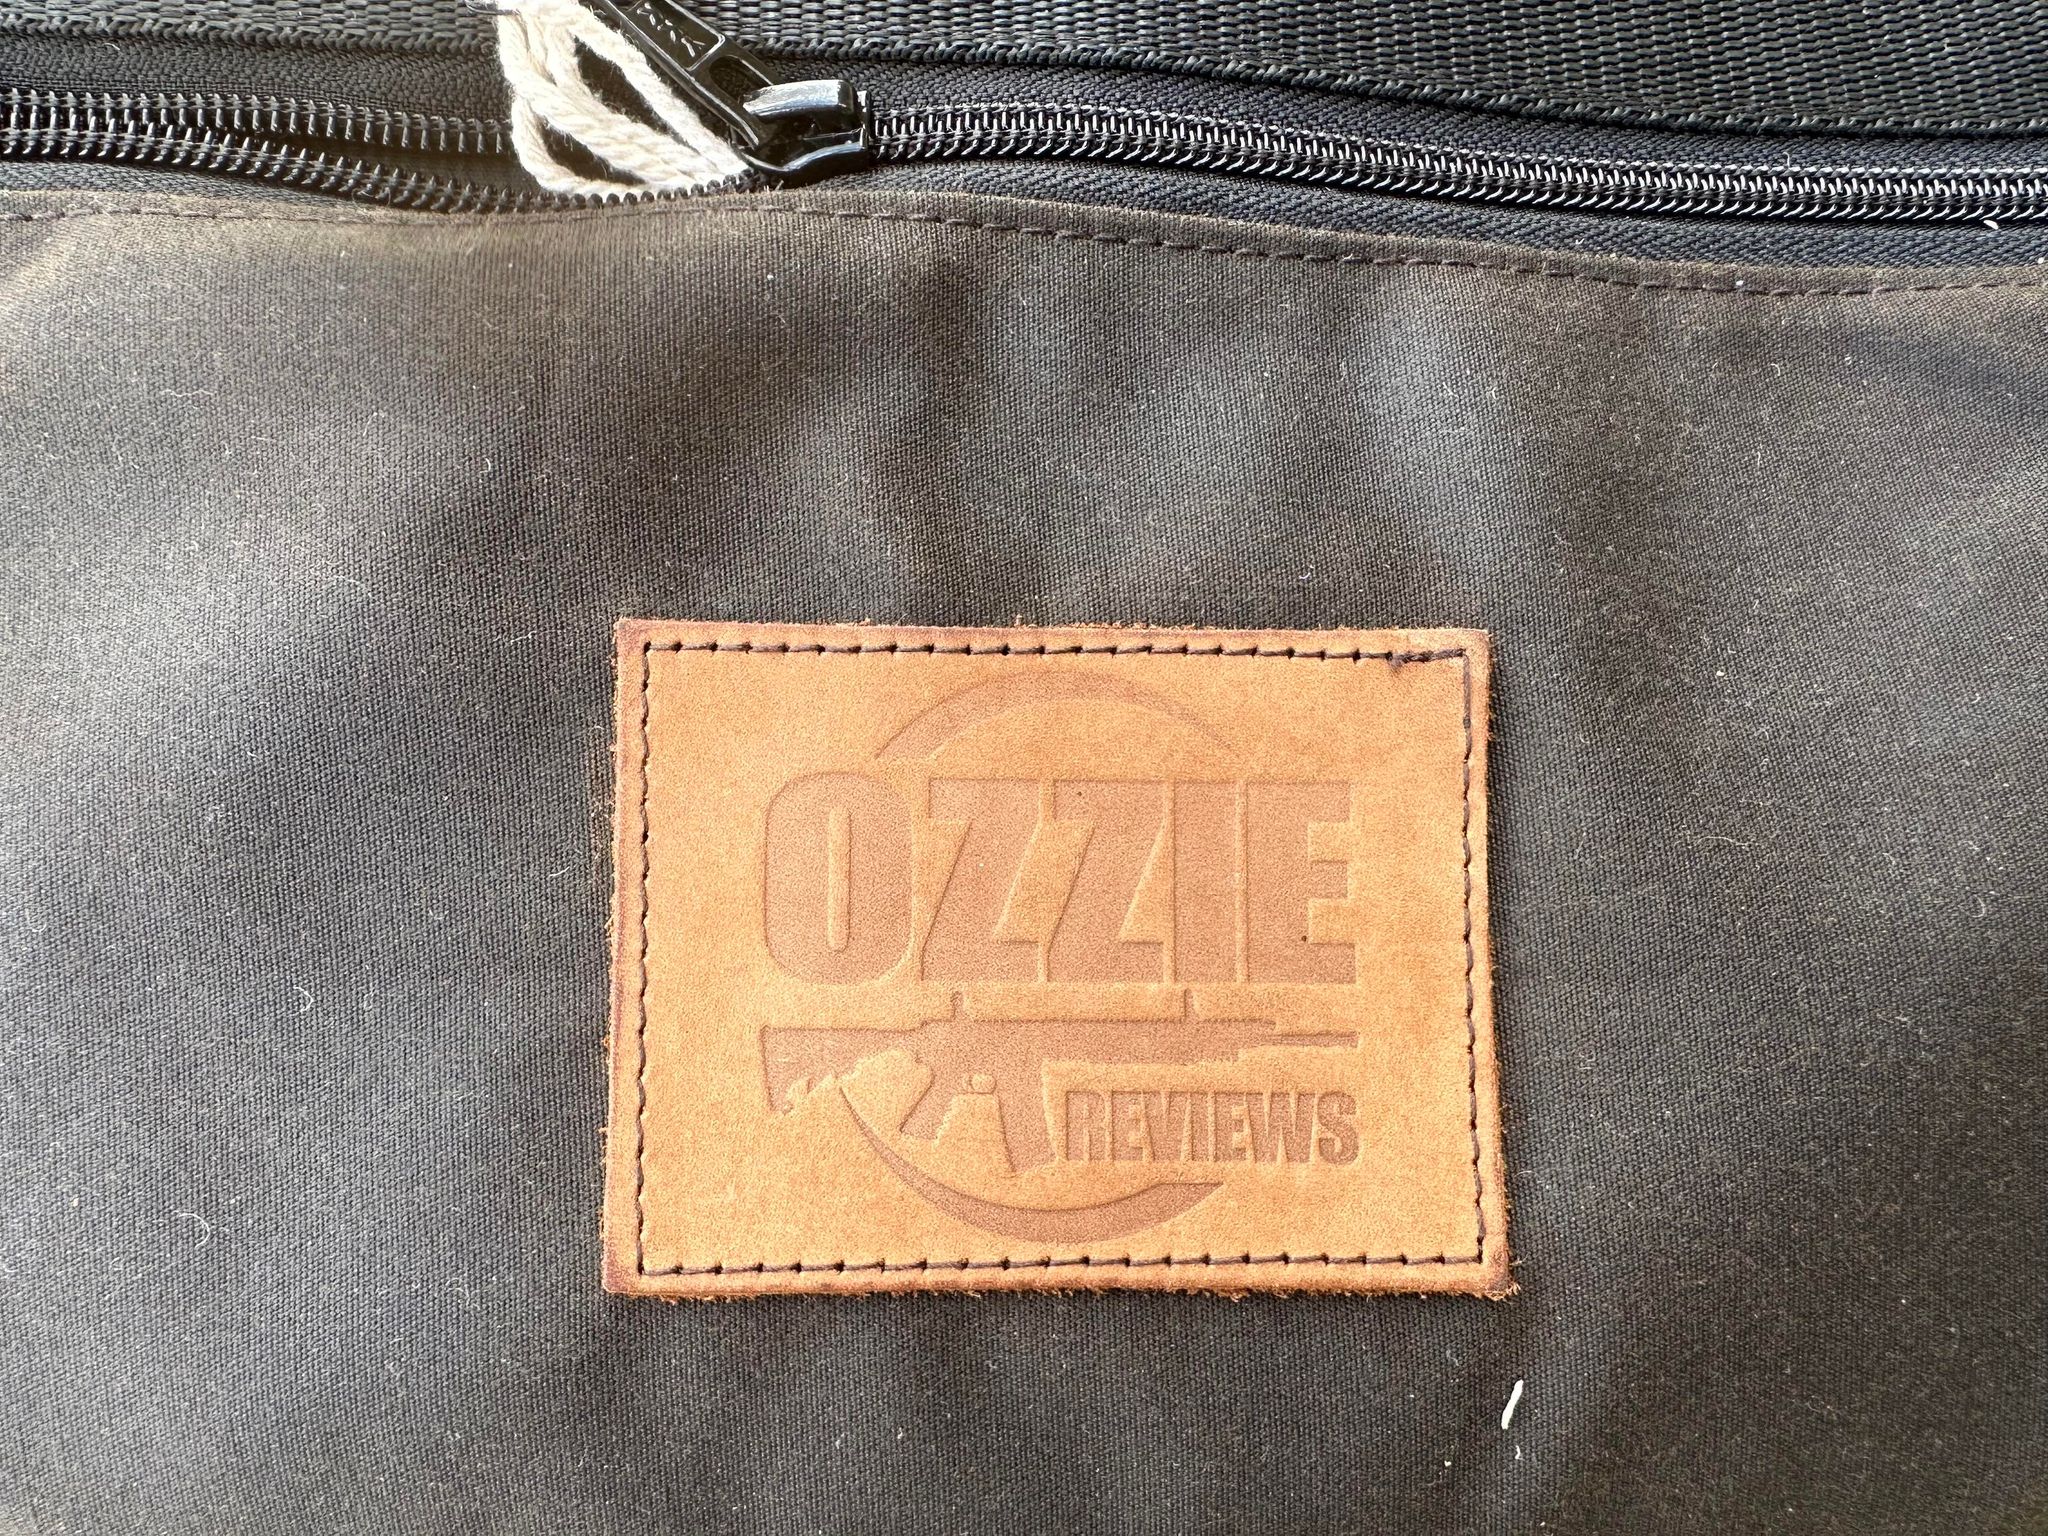 Branded leather